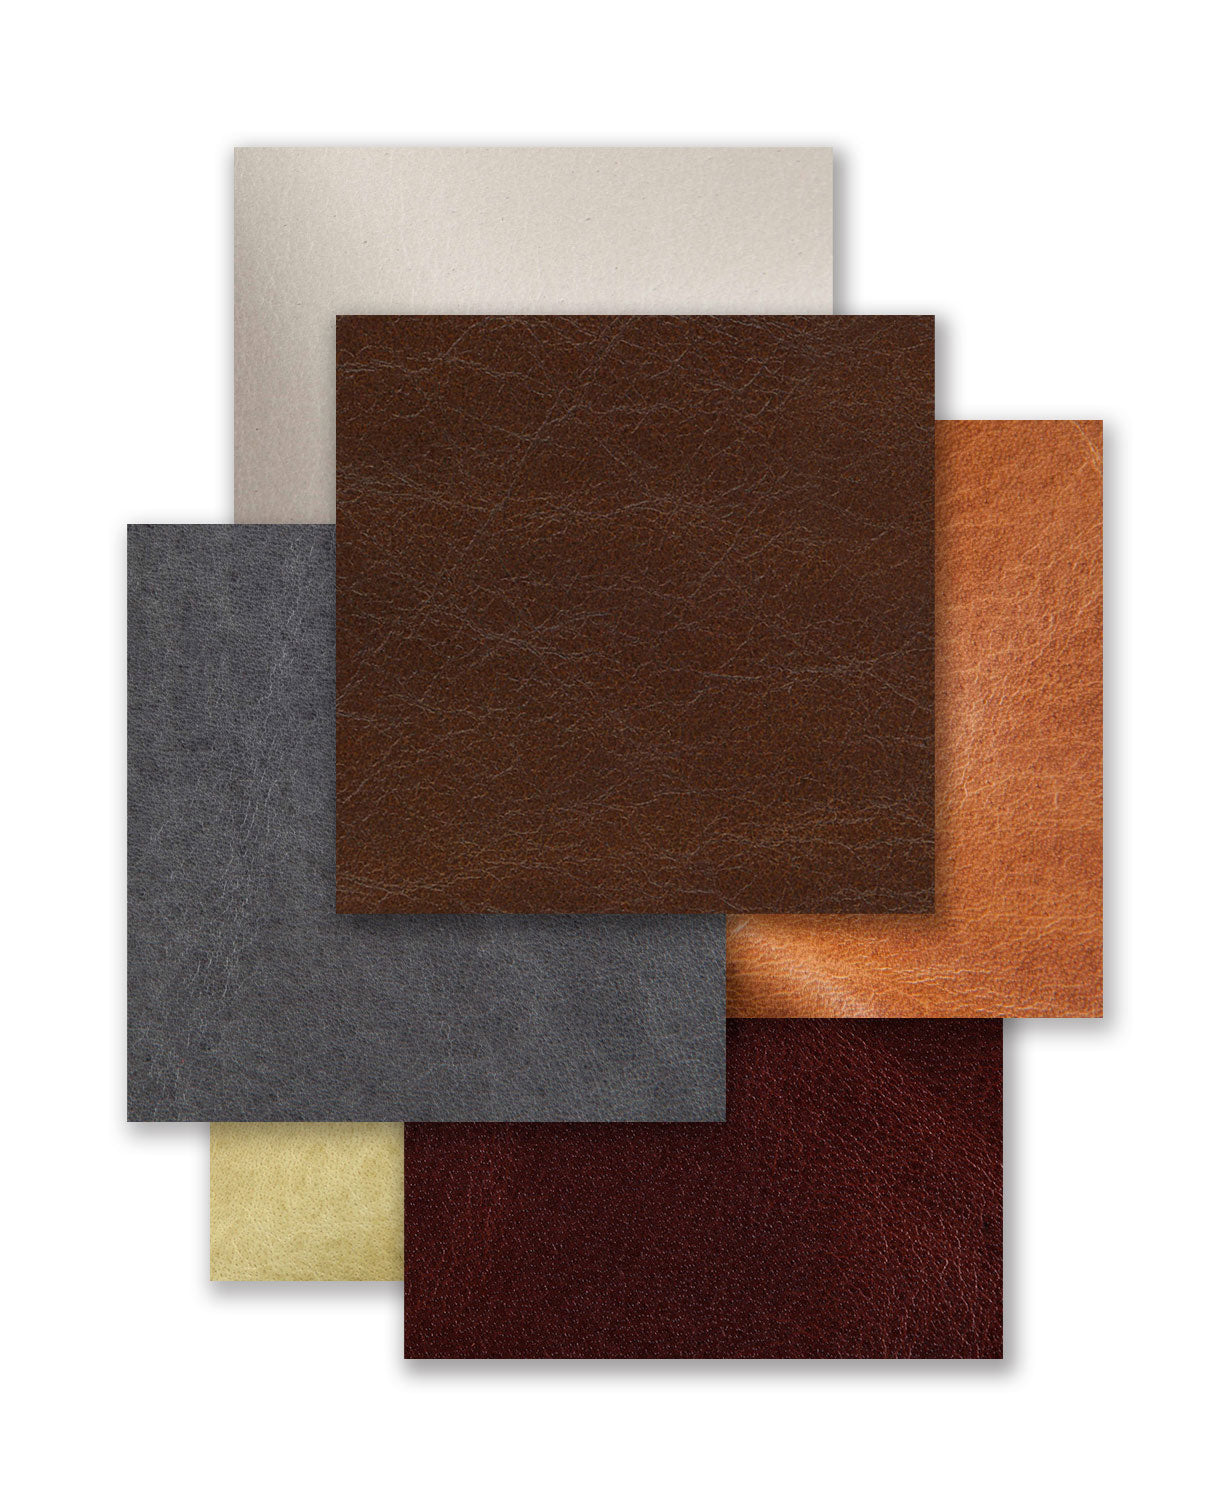 Leather swatches of varying colors